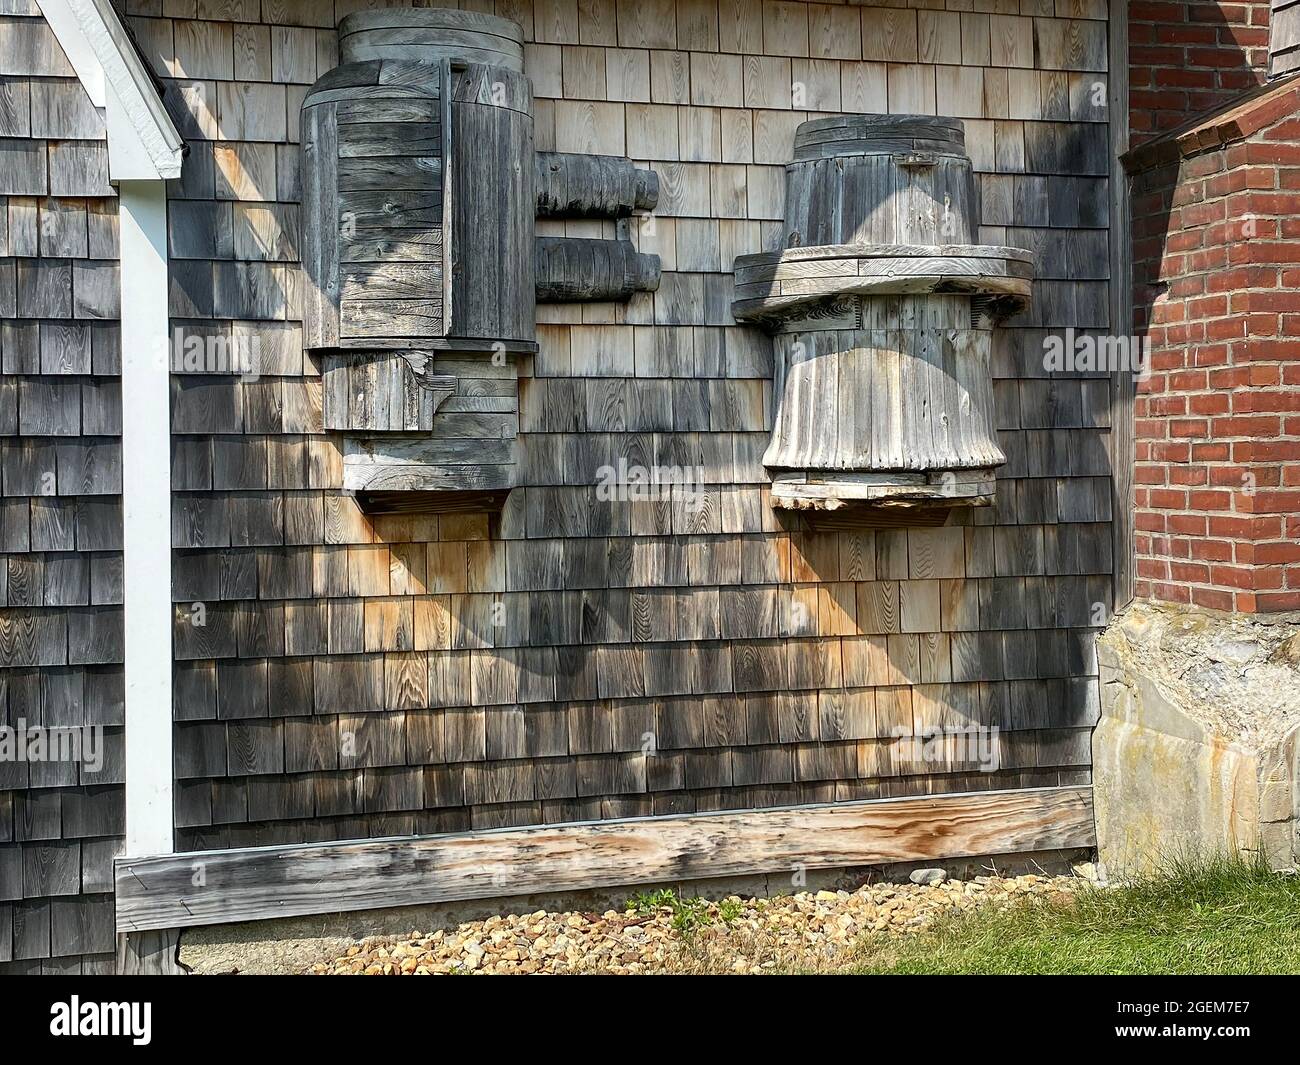 This sculpture—Wooden Barrel-type structures attached to house— was done by American artist Bernard Langlais and is housed at the Langlais Sculpture Preserve in Cushing, Maine. Bernard Langlais (1921 - 1977) was a Maine native and maintained a studio in Cushing, Maine until his death at the age of 56. He developed his artistic interest at the Corcoran School of Art in Washington DC and the Skowhegan School of Painting and Sculpture. Stock Photo